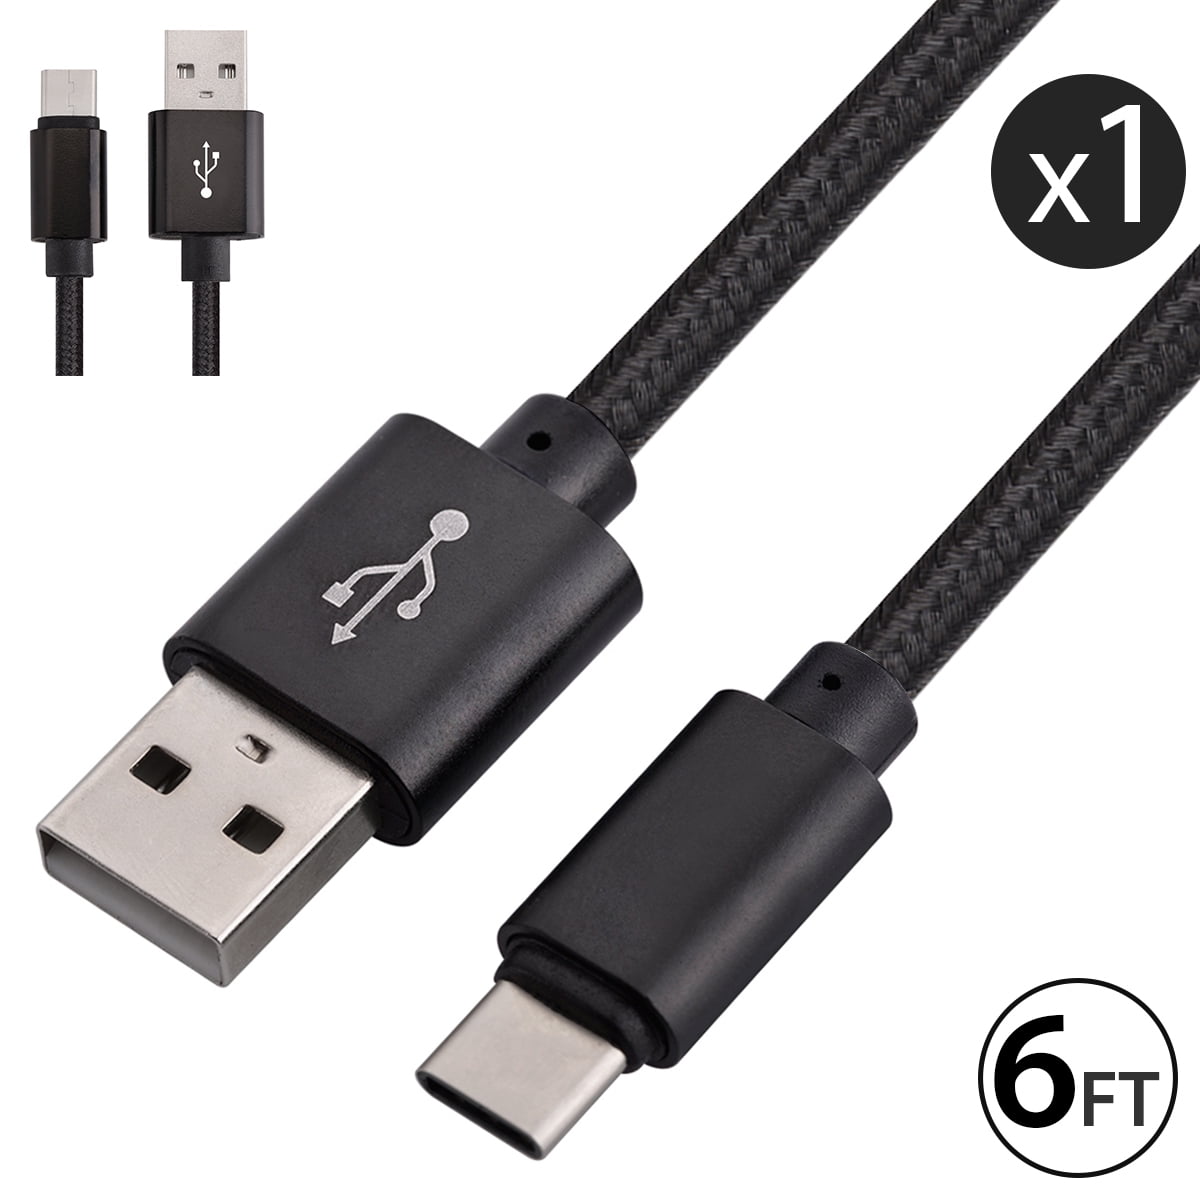 USB Type C Cable Charger, FREEDOMTECH 6ft USB C to USB A ...